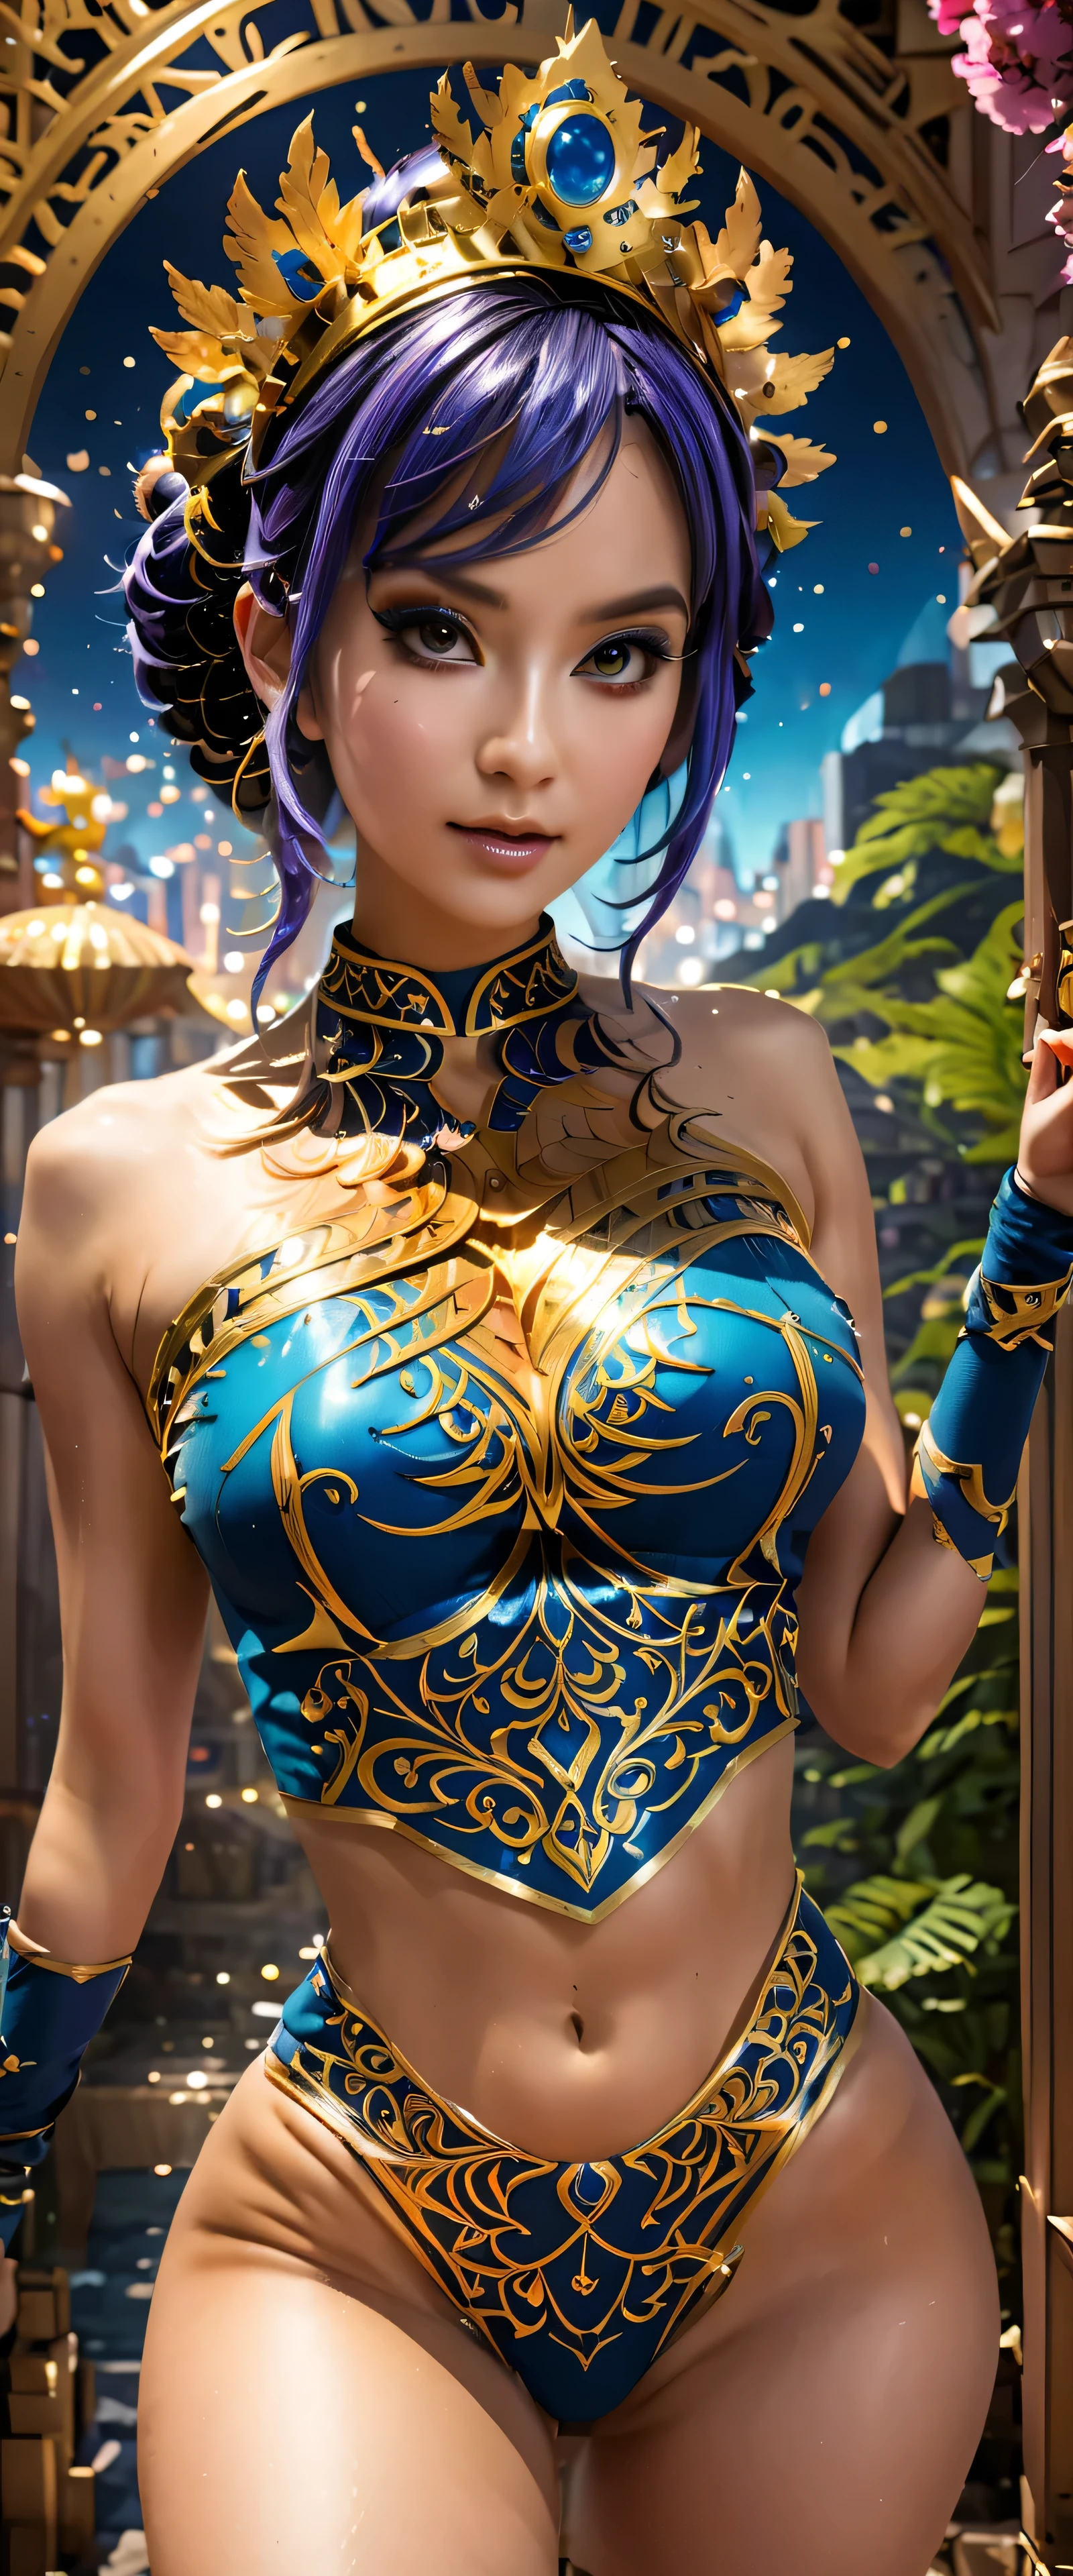 (best quality,4k,8k,highres,masterpiece:1.2),ultra-detailed,realistic,cosplay girl,costume,character depiction,attention to detail,expressive eyes,detailed makeup,striking pose,hair accessories,fantastic background,concept artists,vivid colors,dynamic lighting,bokeh,playful expression,creative props,designer clothing,androgynous appearance,masterful craftsmanship,impressive craftsmanship,immaculate attention to detail,lifelike representation,high-quality materials,photorealistic rendering,anatomically_perfect_body_proportions,anime-inspired style,beautifully textured fabric,eye-catching patterns,exquisite embroidery,ornate designs,intricate beading,stunning headpiece,dramatic lighting,soft shadows,brilliant colors,magical atmosphere,impressive backdrop,imaginative setting,surreal environment.STOP.Safe_for_Work:2